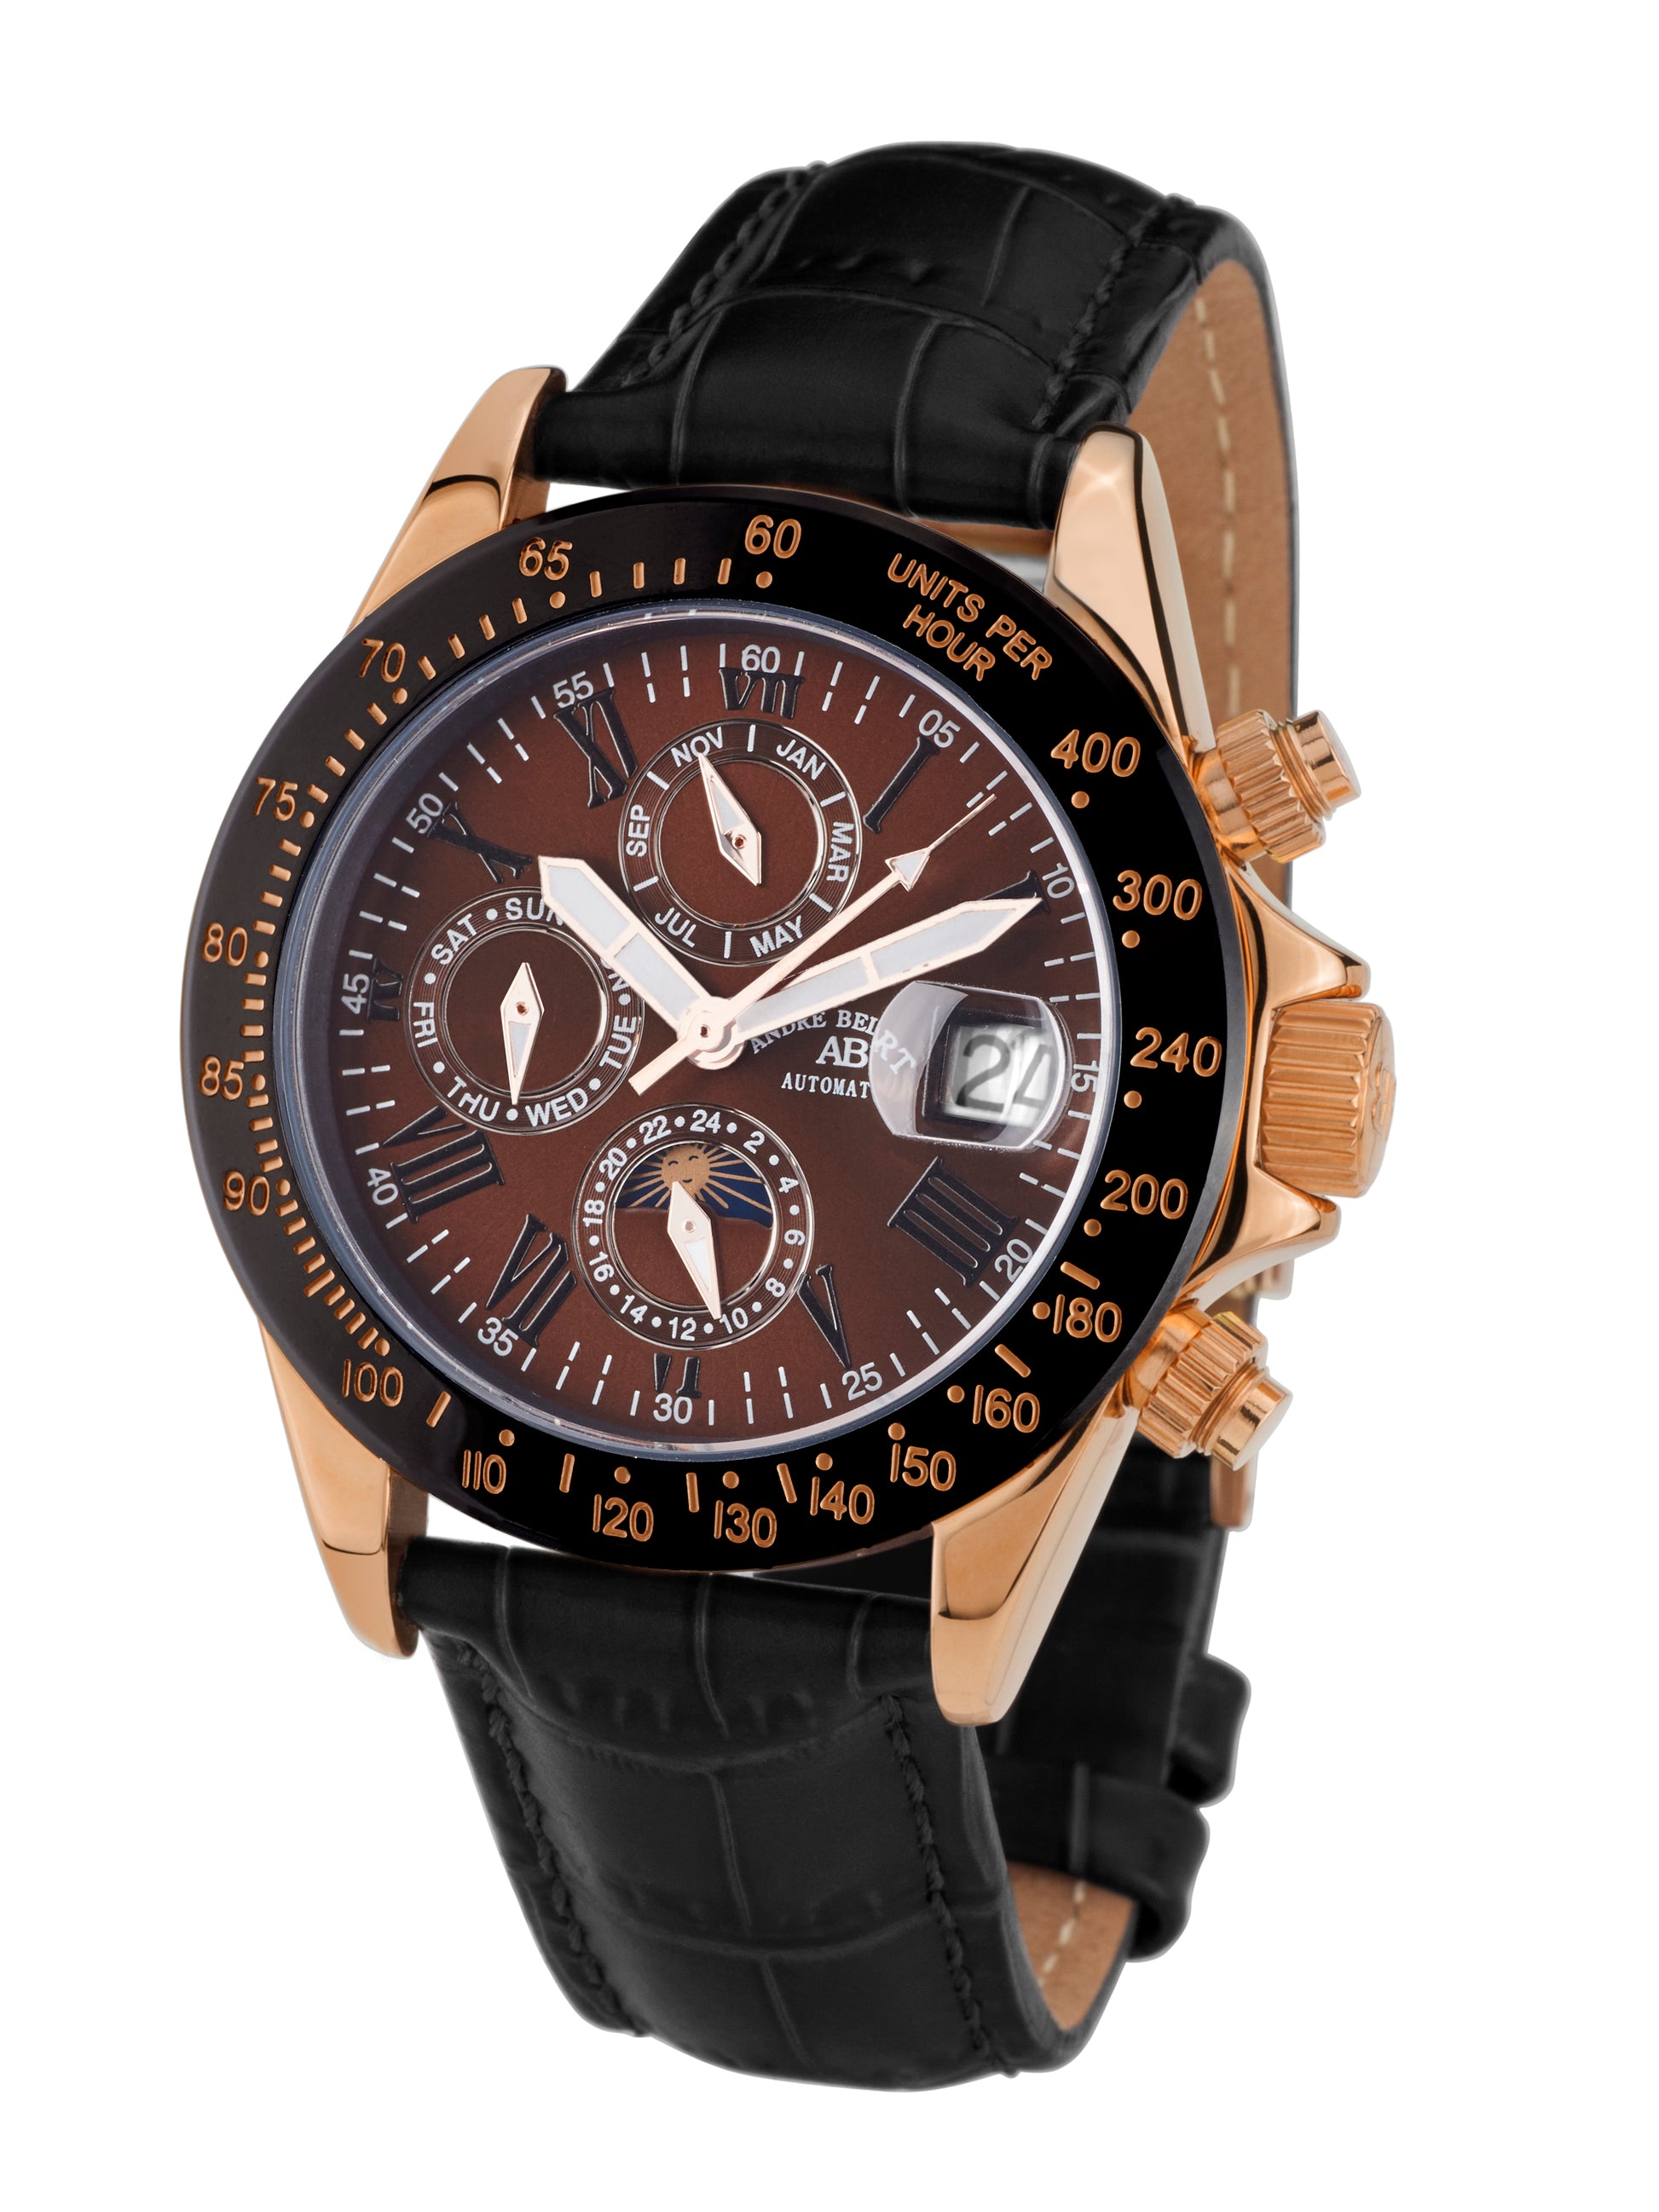 Automatic watches — Le Capitaine — André Belfort — rosegold bronze leather